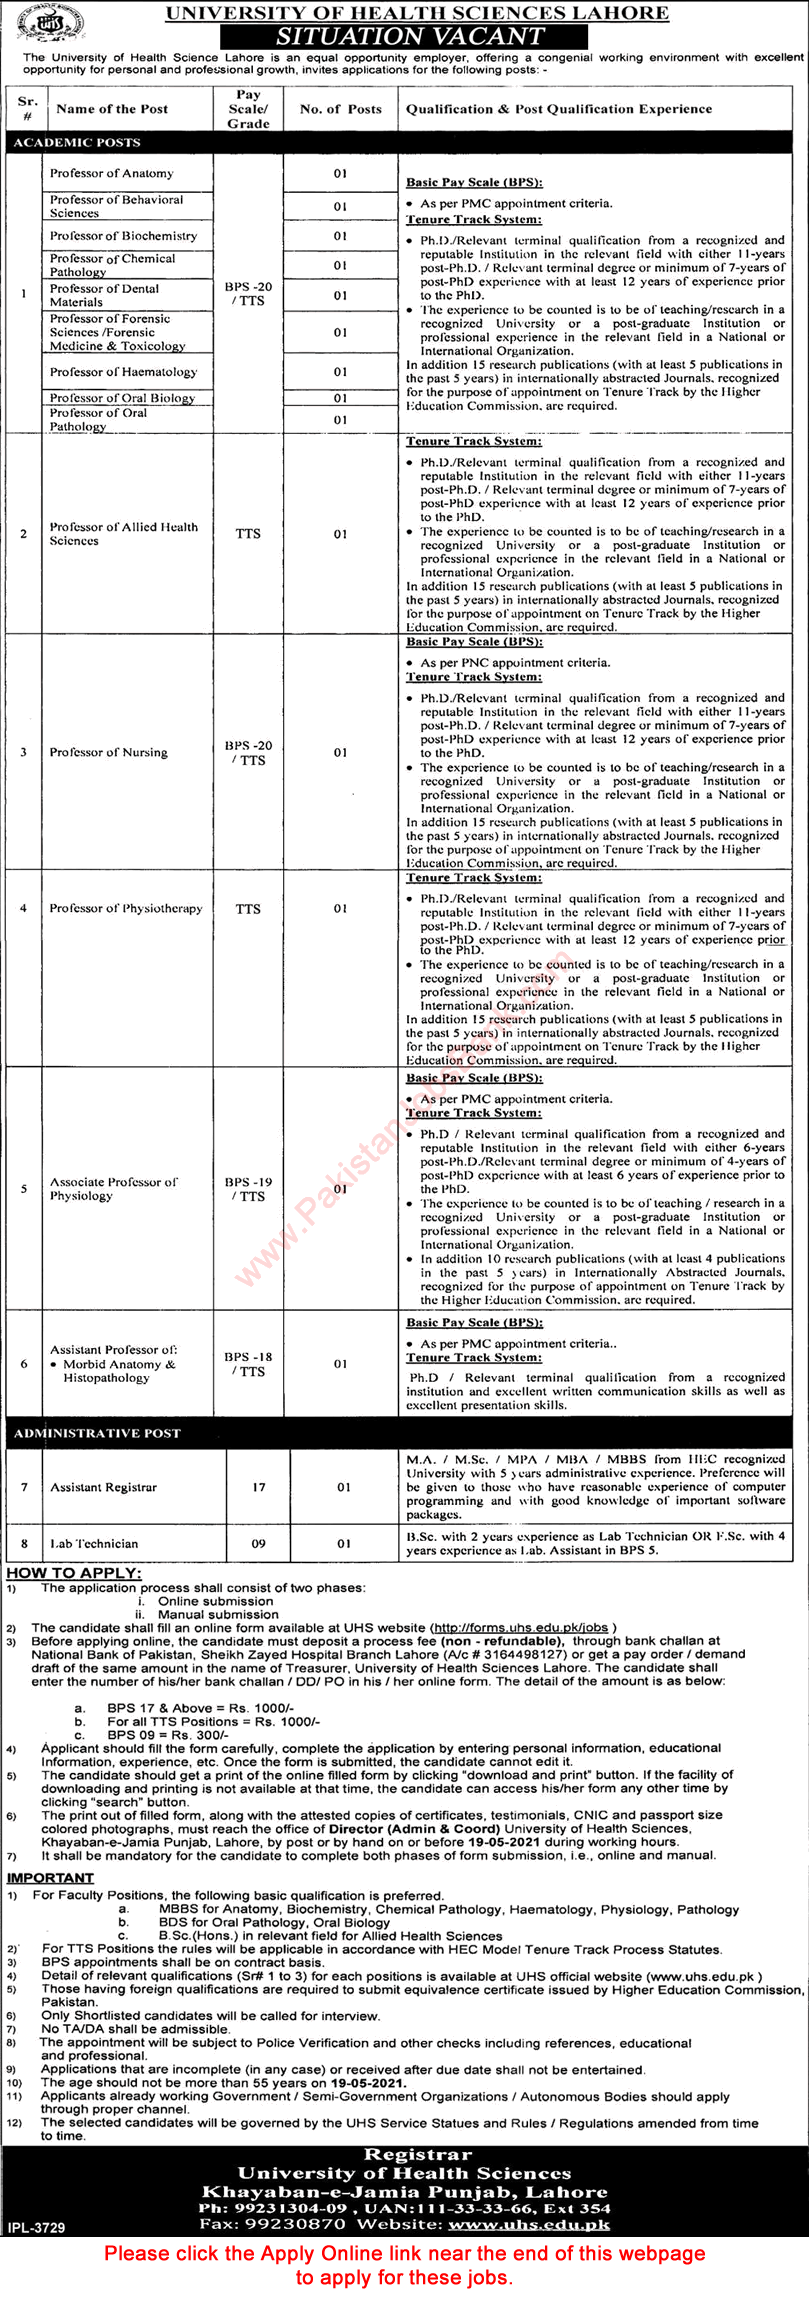 University of Health Sciences Lahore Jobs April 2021 Apply Online Teaching Faculty & Others Latest